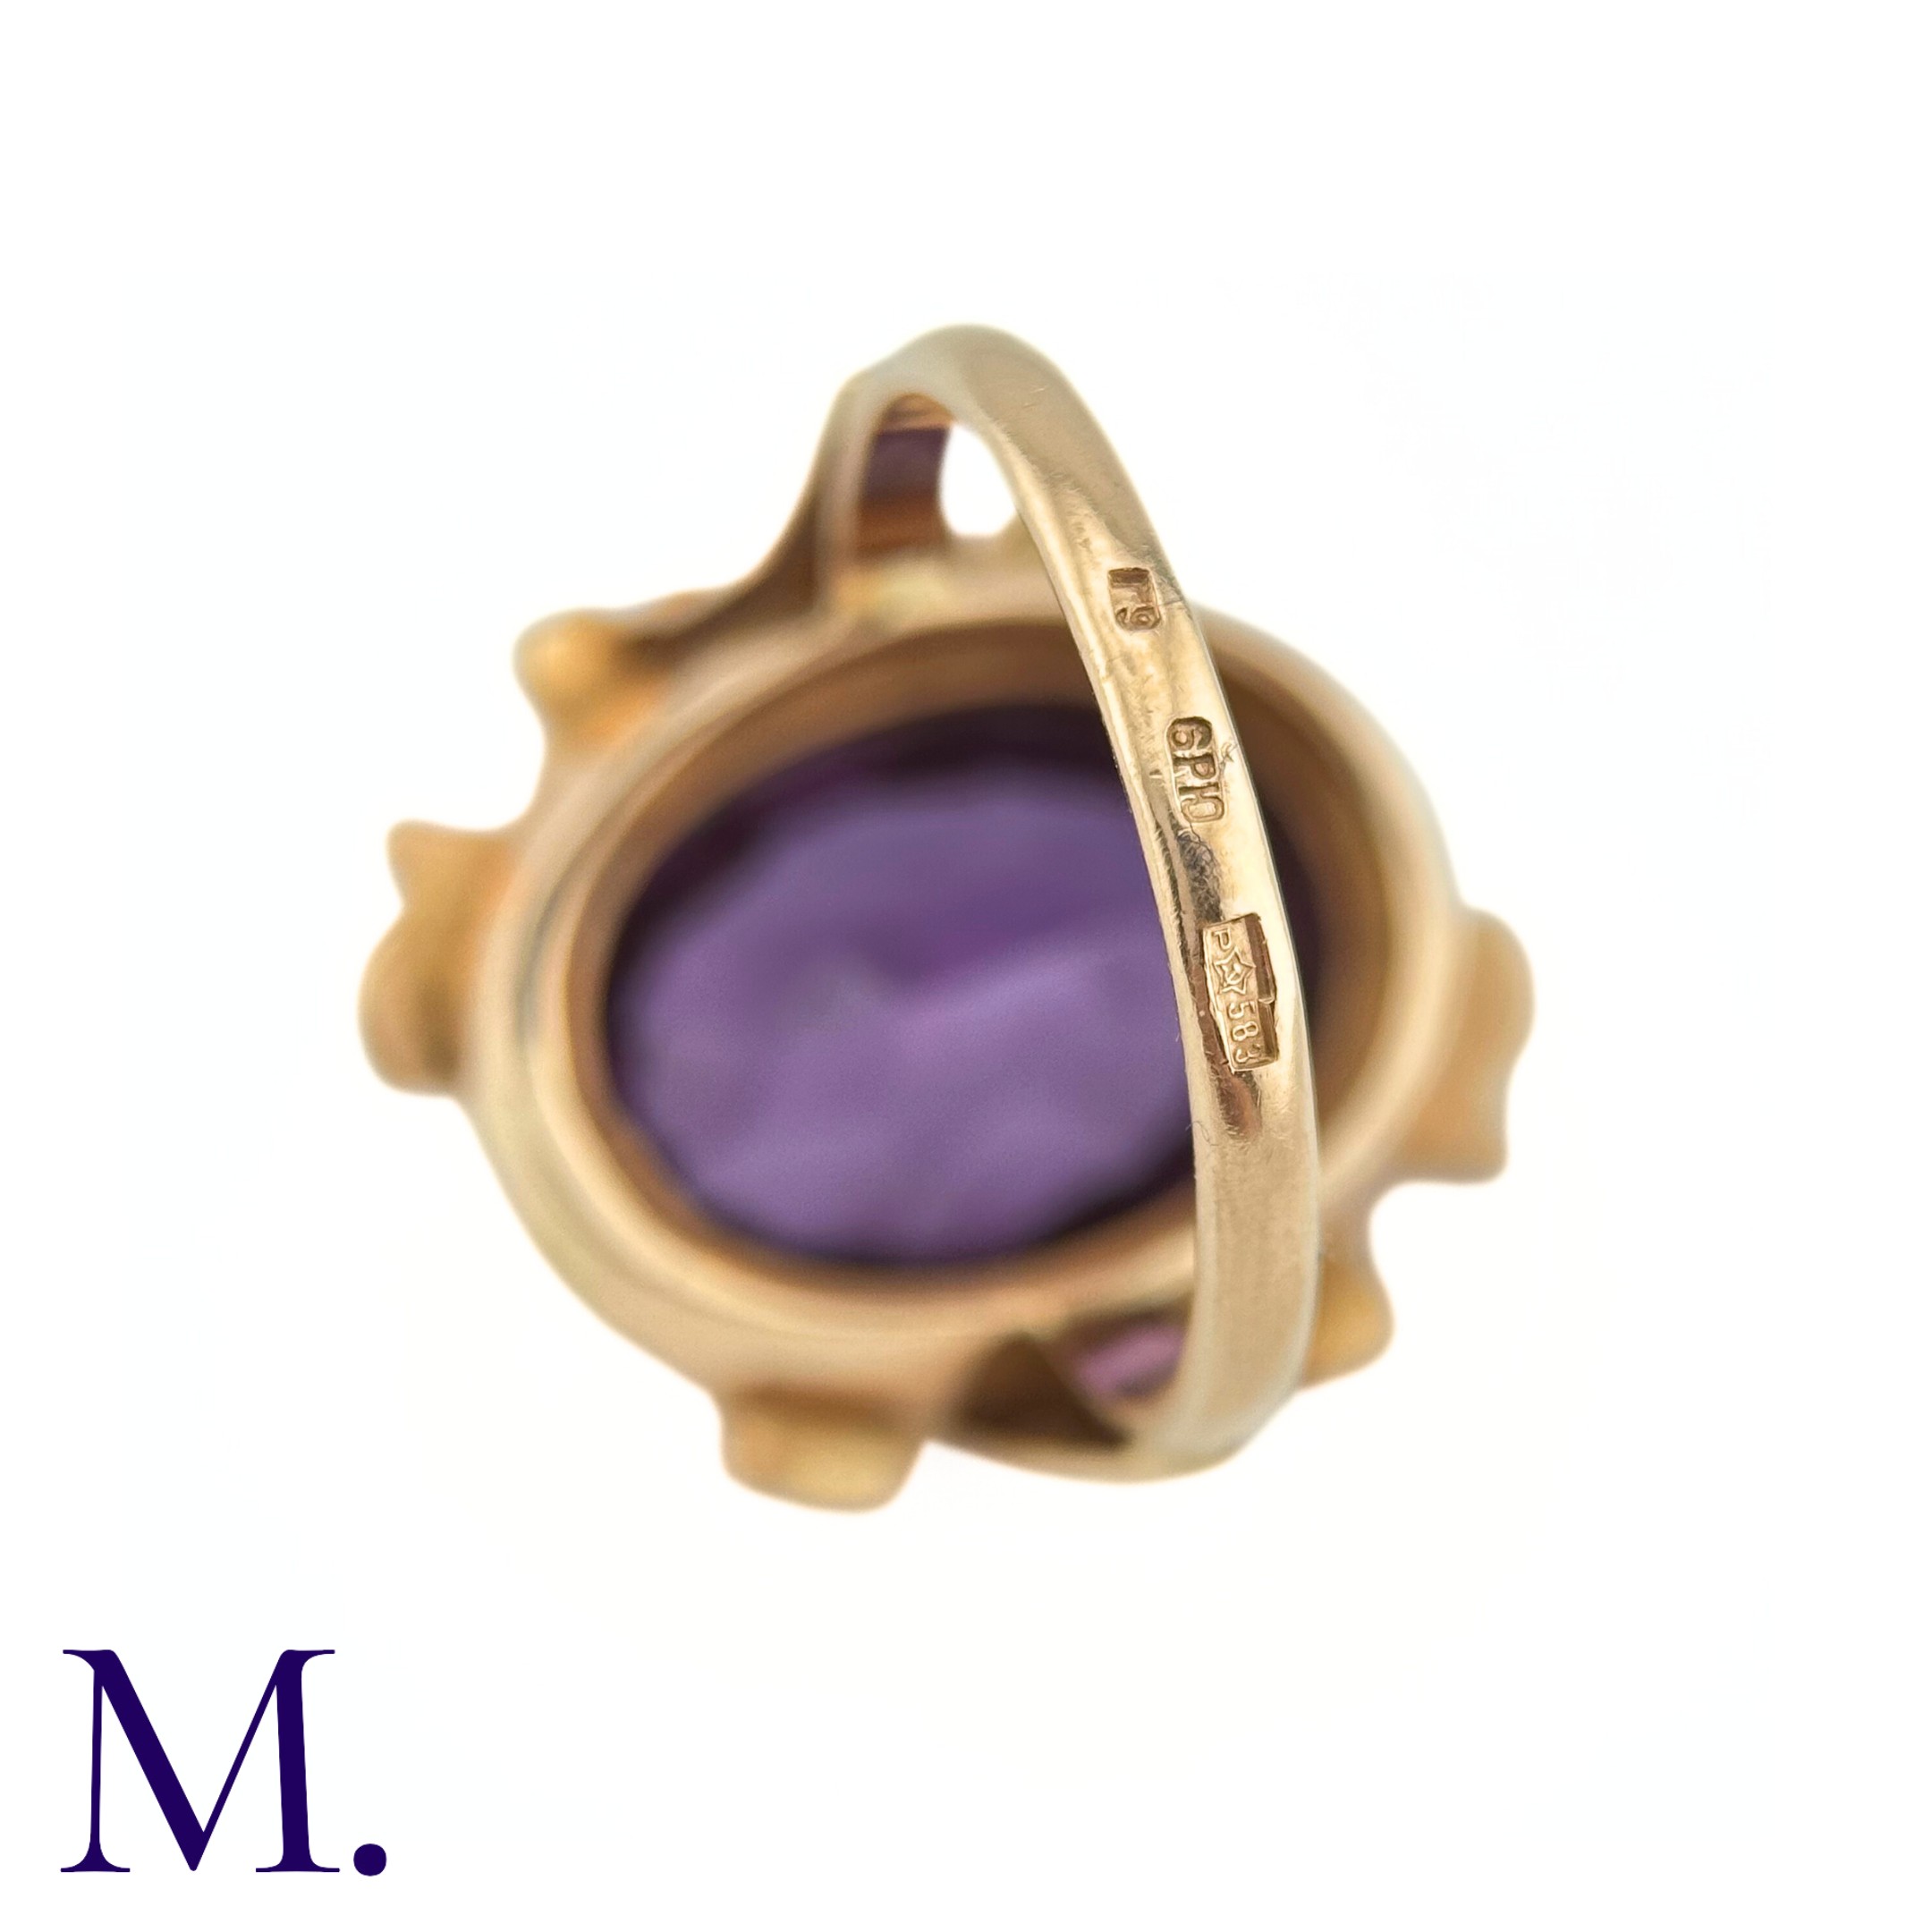 A Russian Purple Sapphire Ring The 14ct rose gold ring, with Russian hallmarks, is set with a - Image 4 of 6